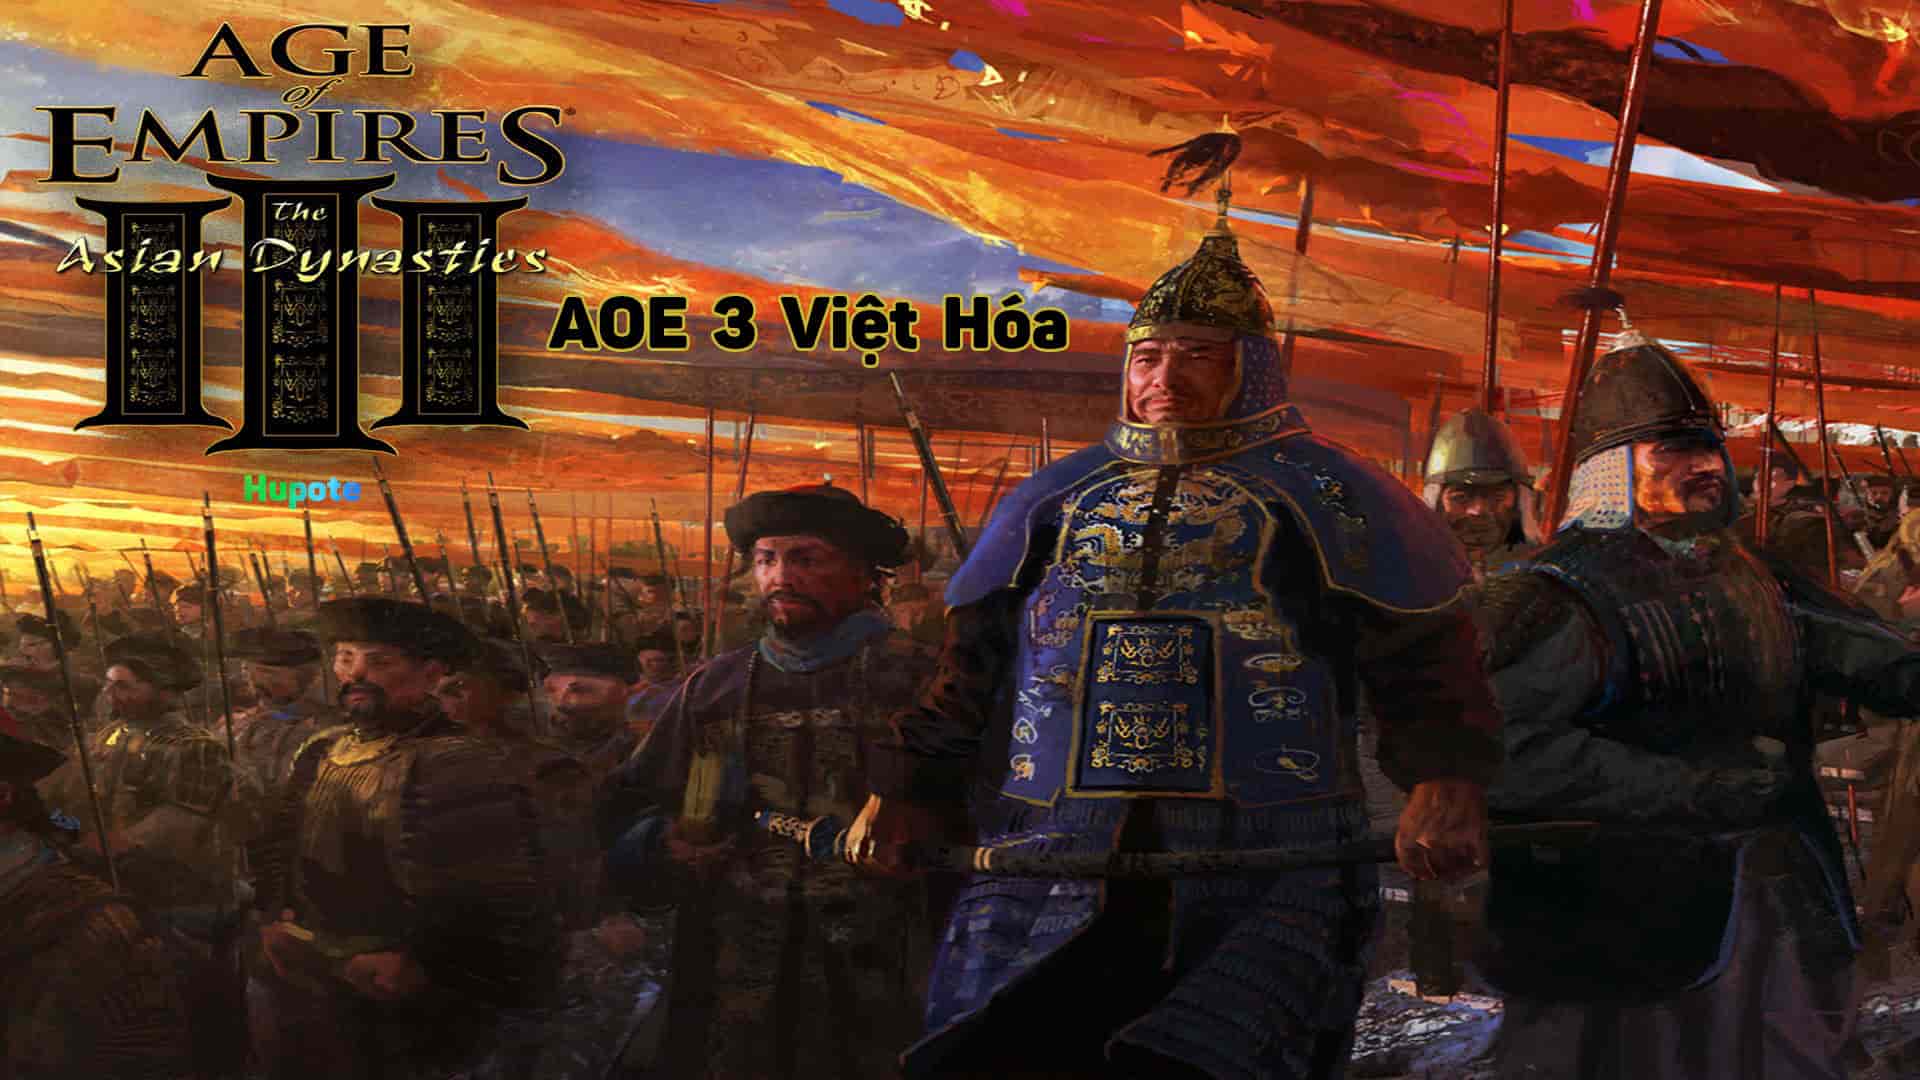 Tải AOE 3 Việt Hóa Full PC - Age of Empires III - Hupote